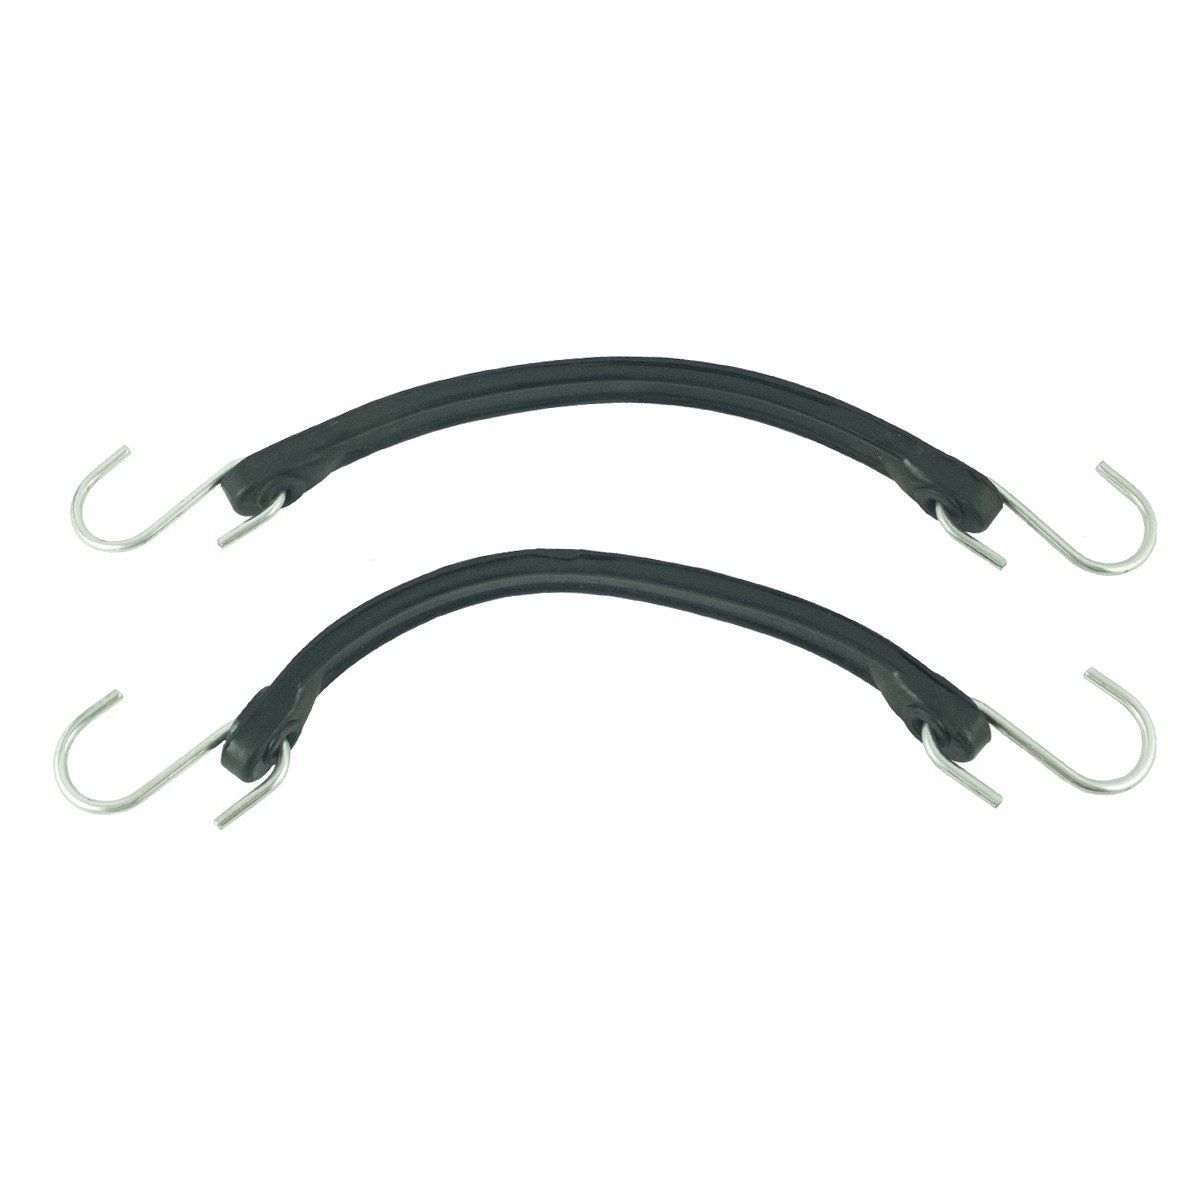 Rubber band 2 x 230 mm / three-point rubber / rubber spring for three-point slings